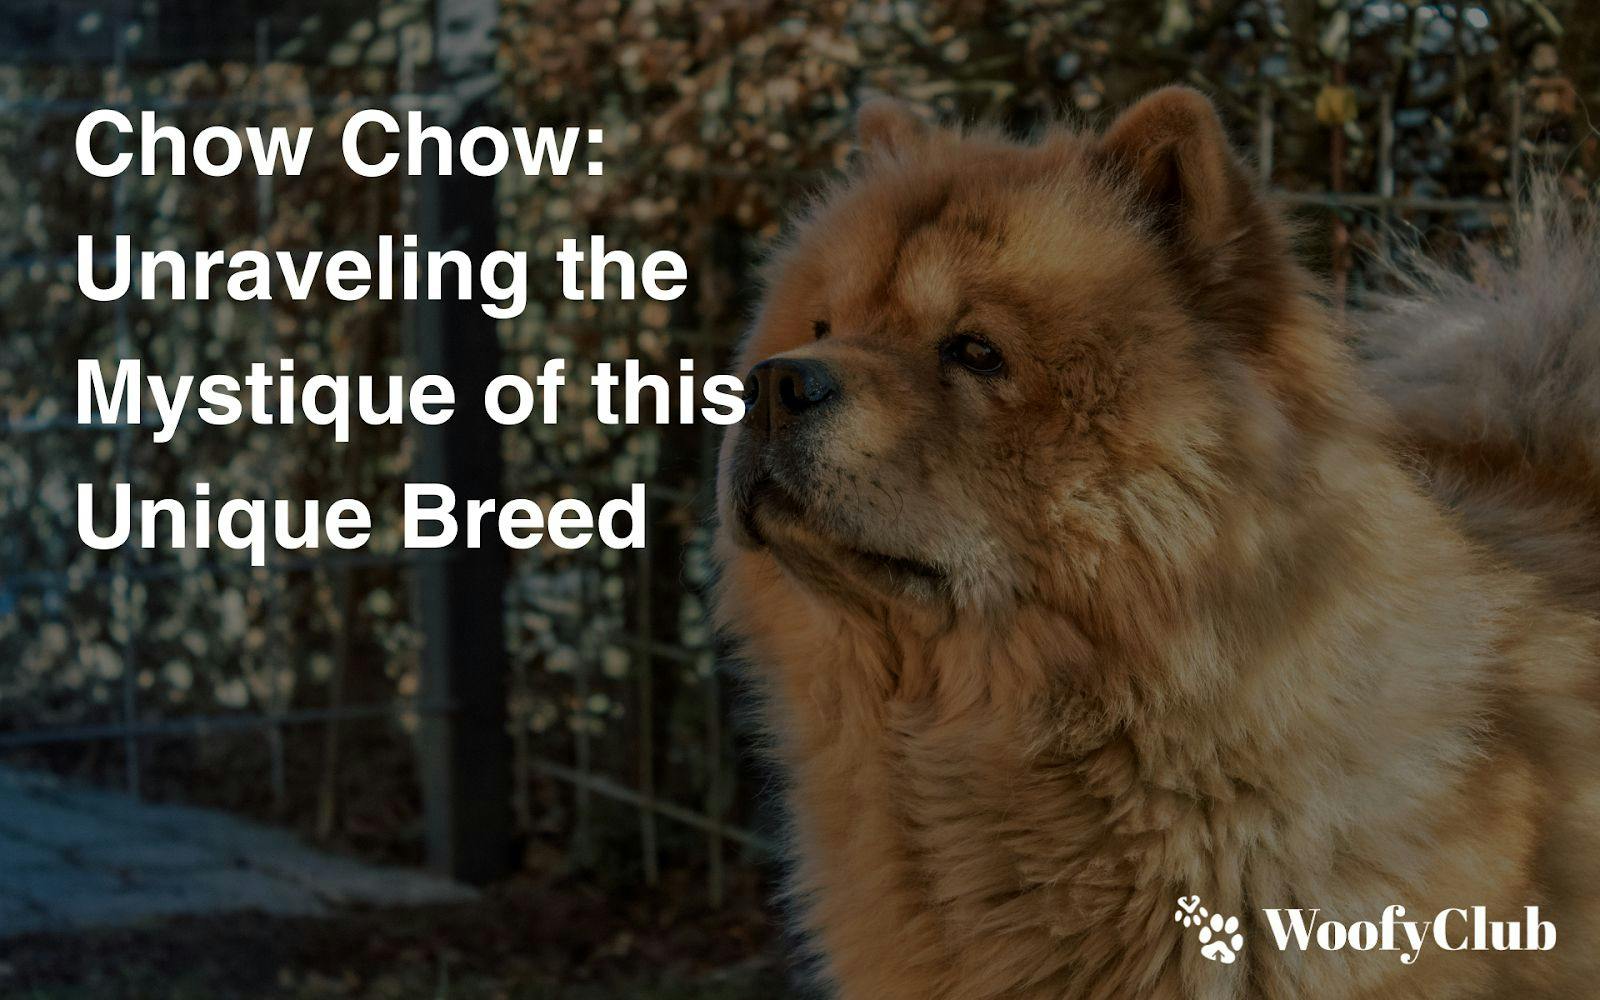 Chow Chow: Unraveling The Mystique Of This Unique Breed